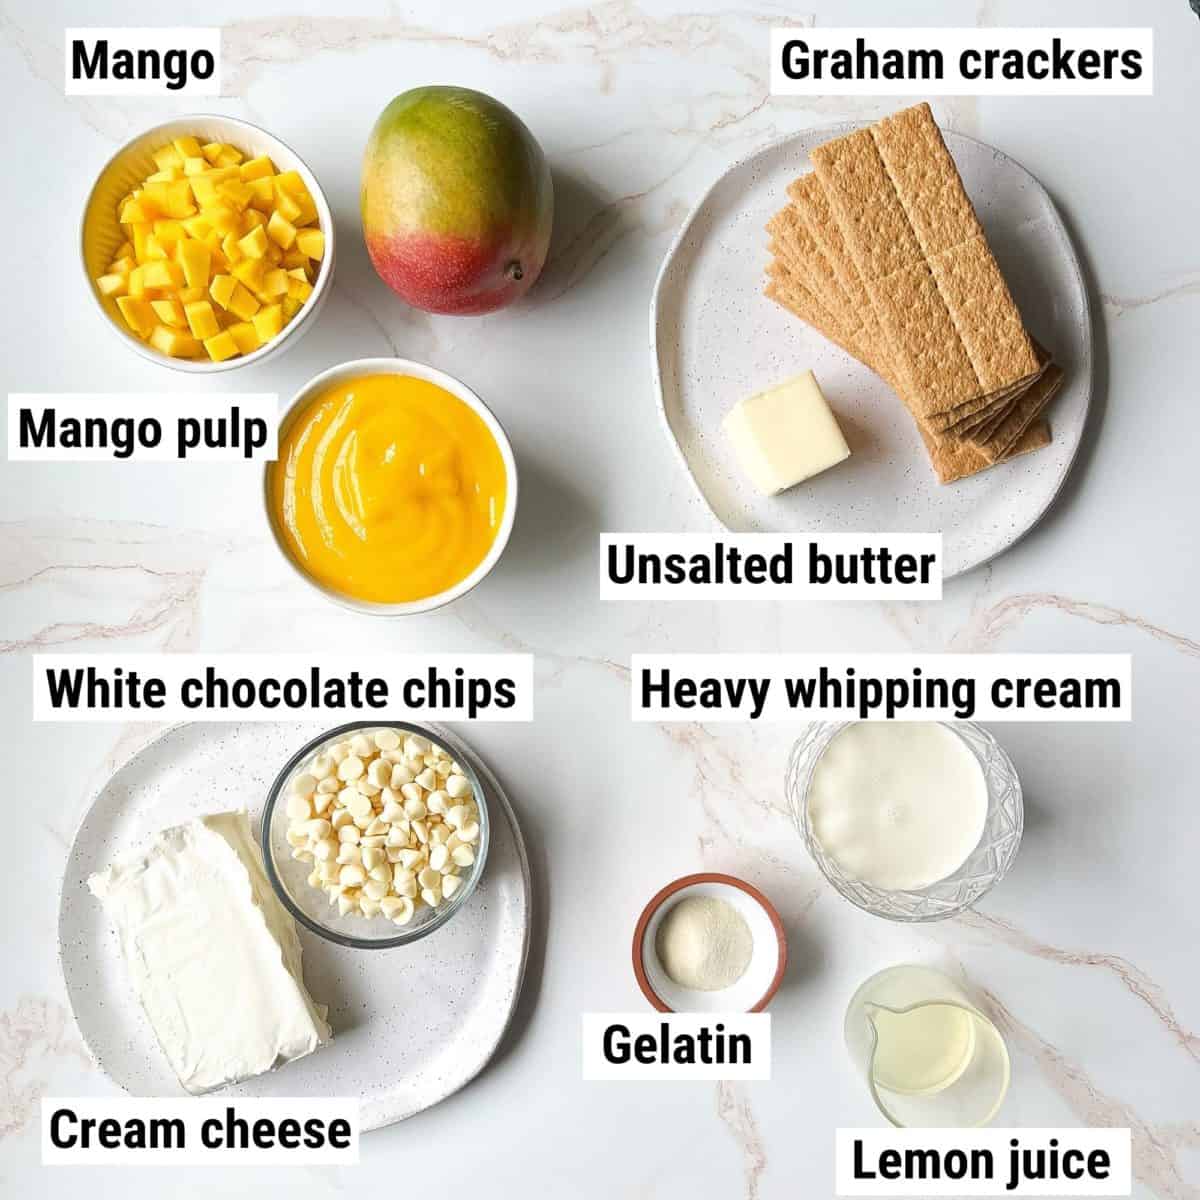 The ingredients to make mango cheesecake spread out on a table.